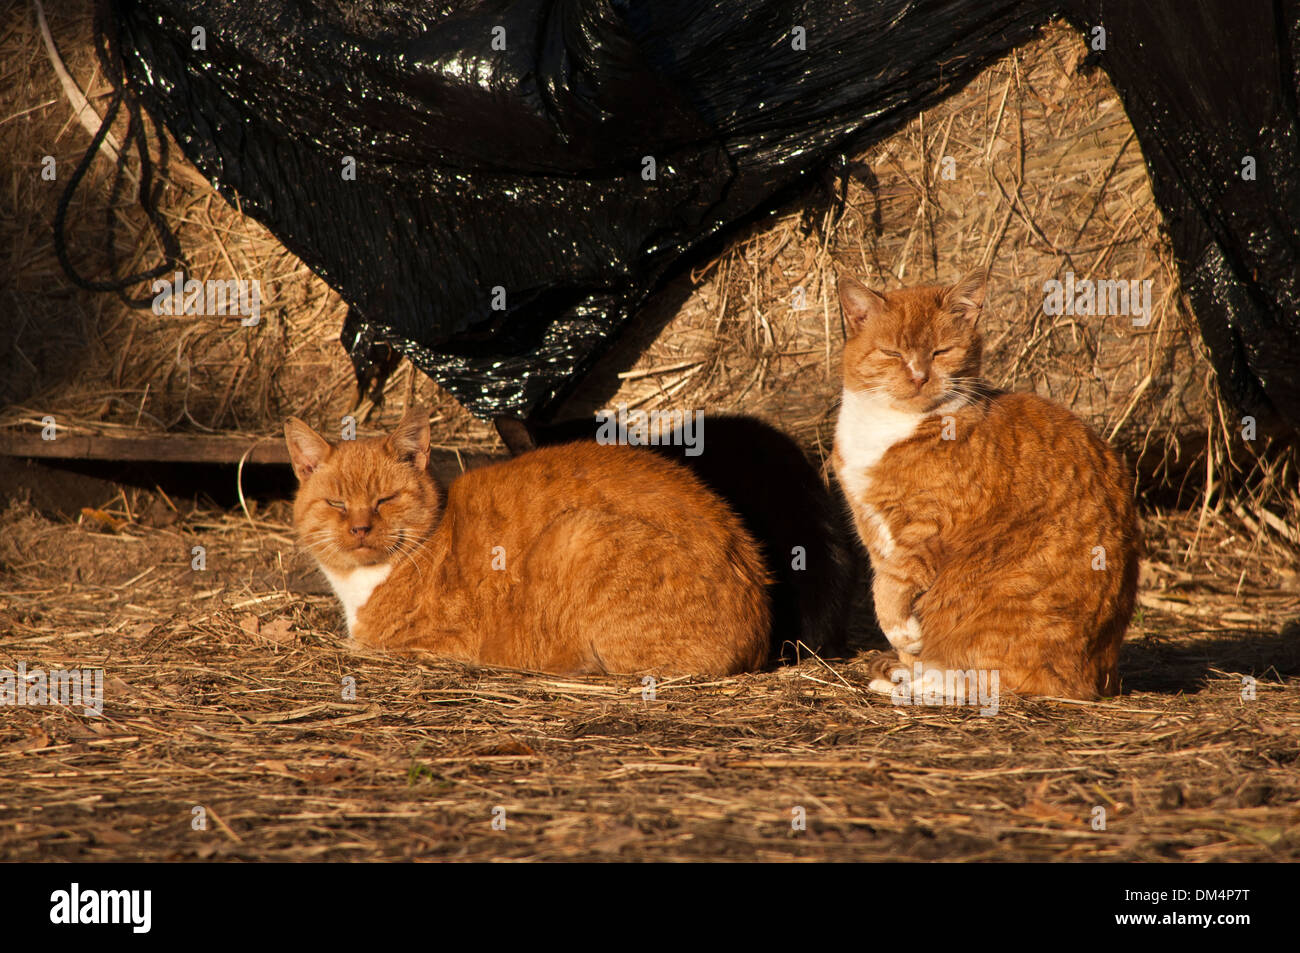 Ginger farm cats sunning themselves cat Stock Photo